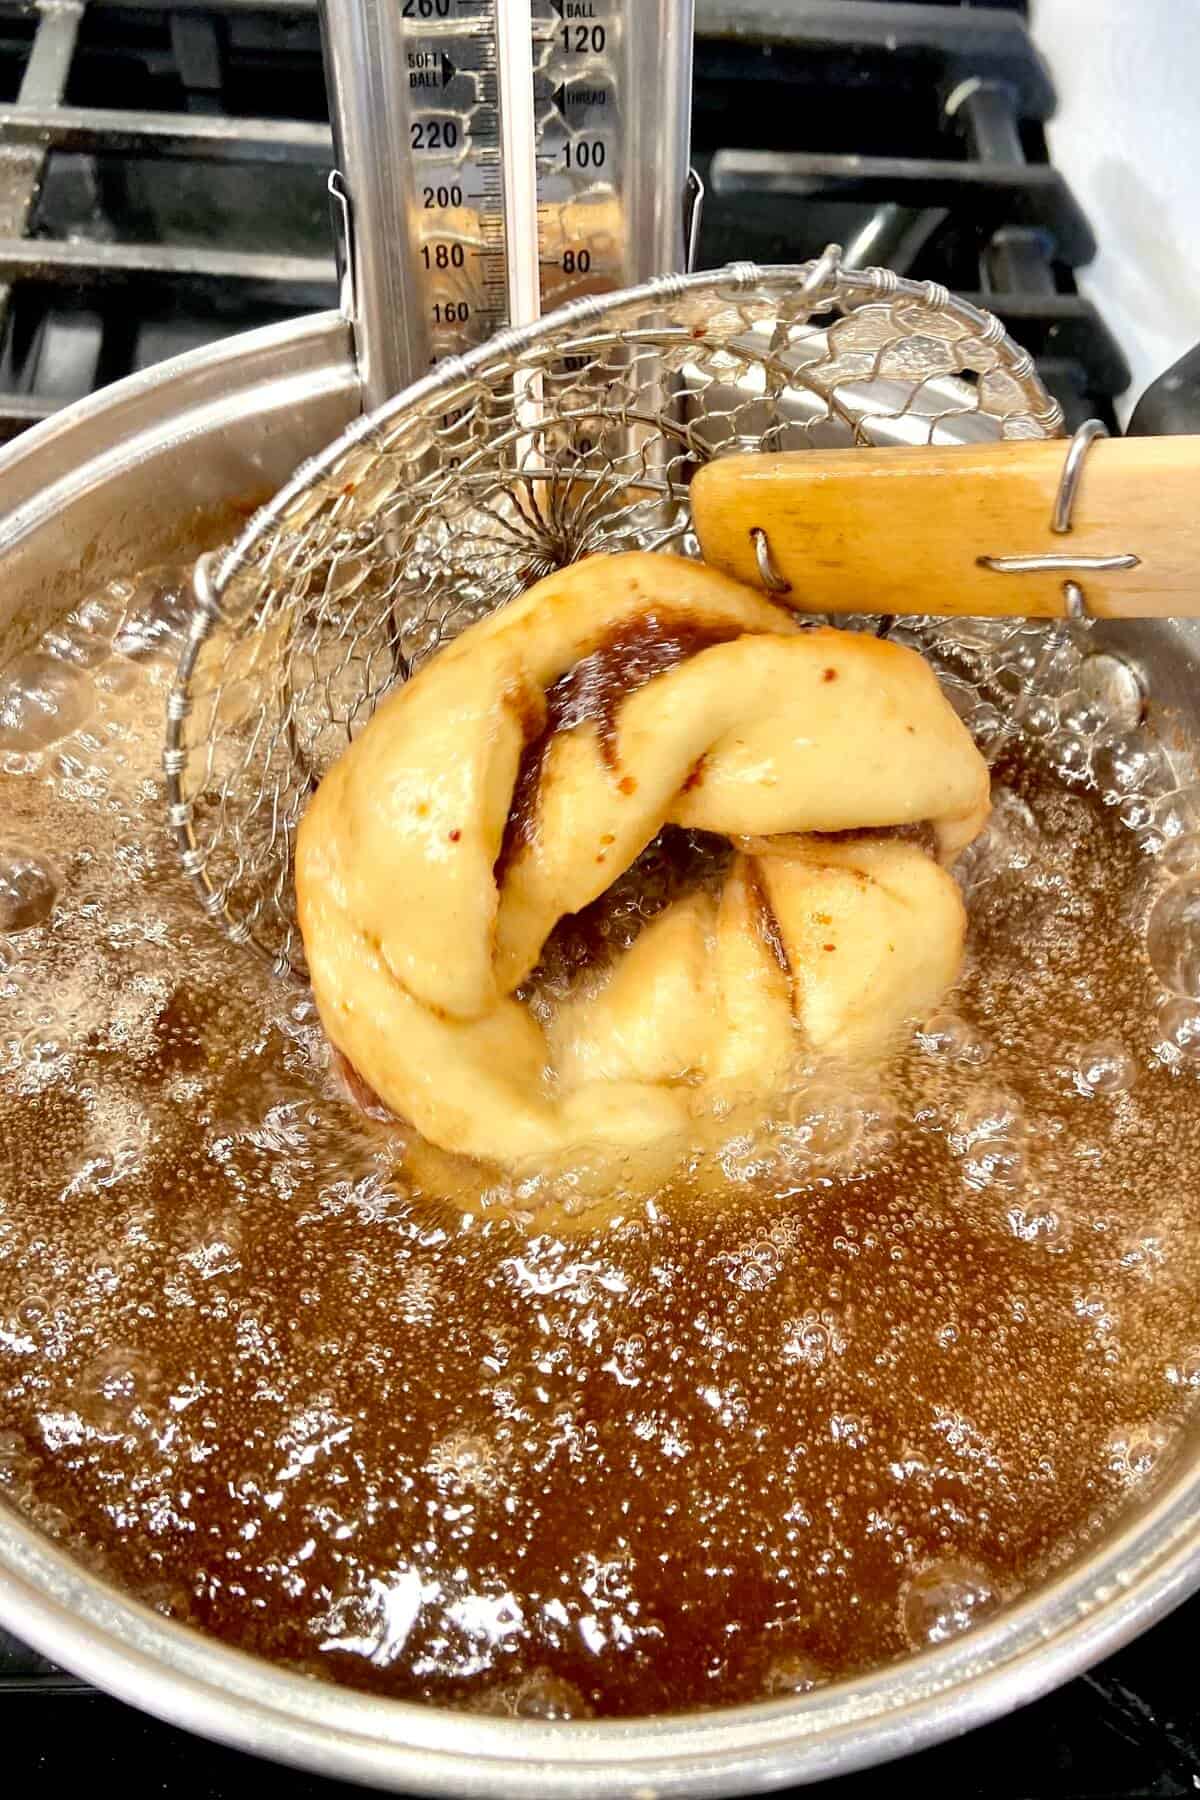 Turning the donut over, while it's frying in oil.